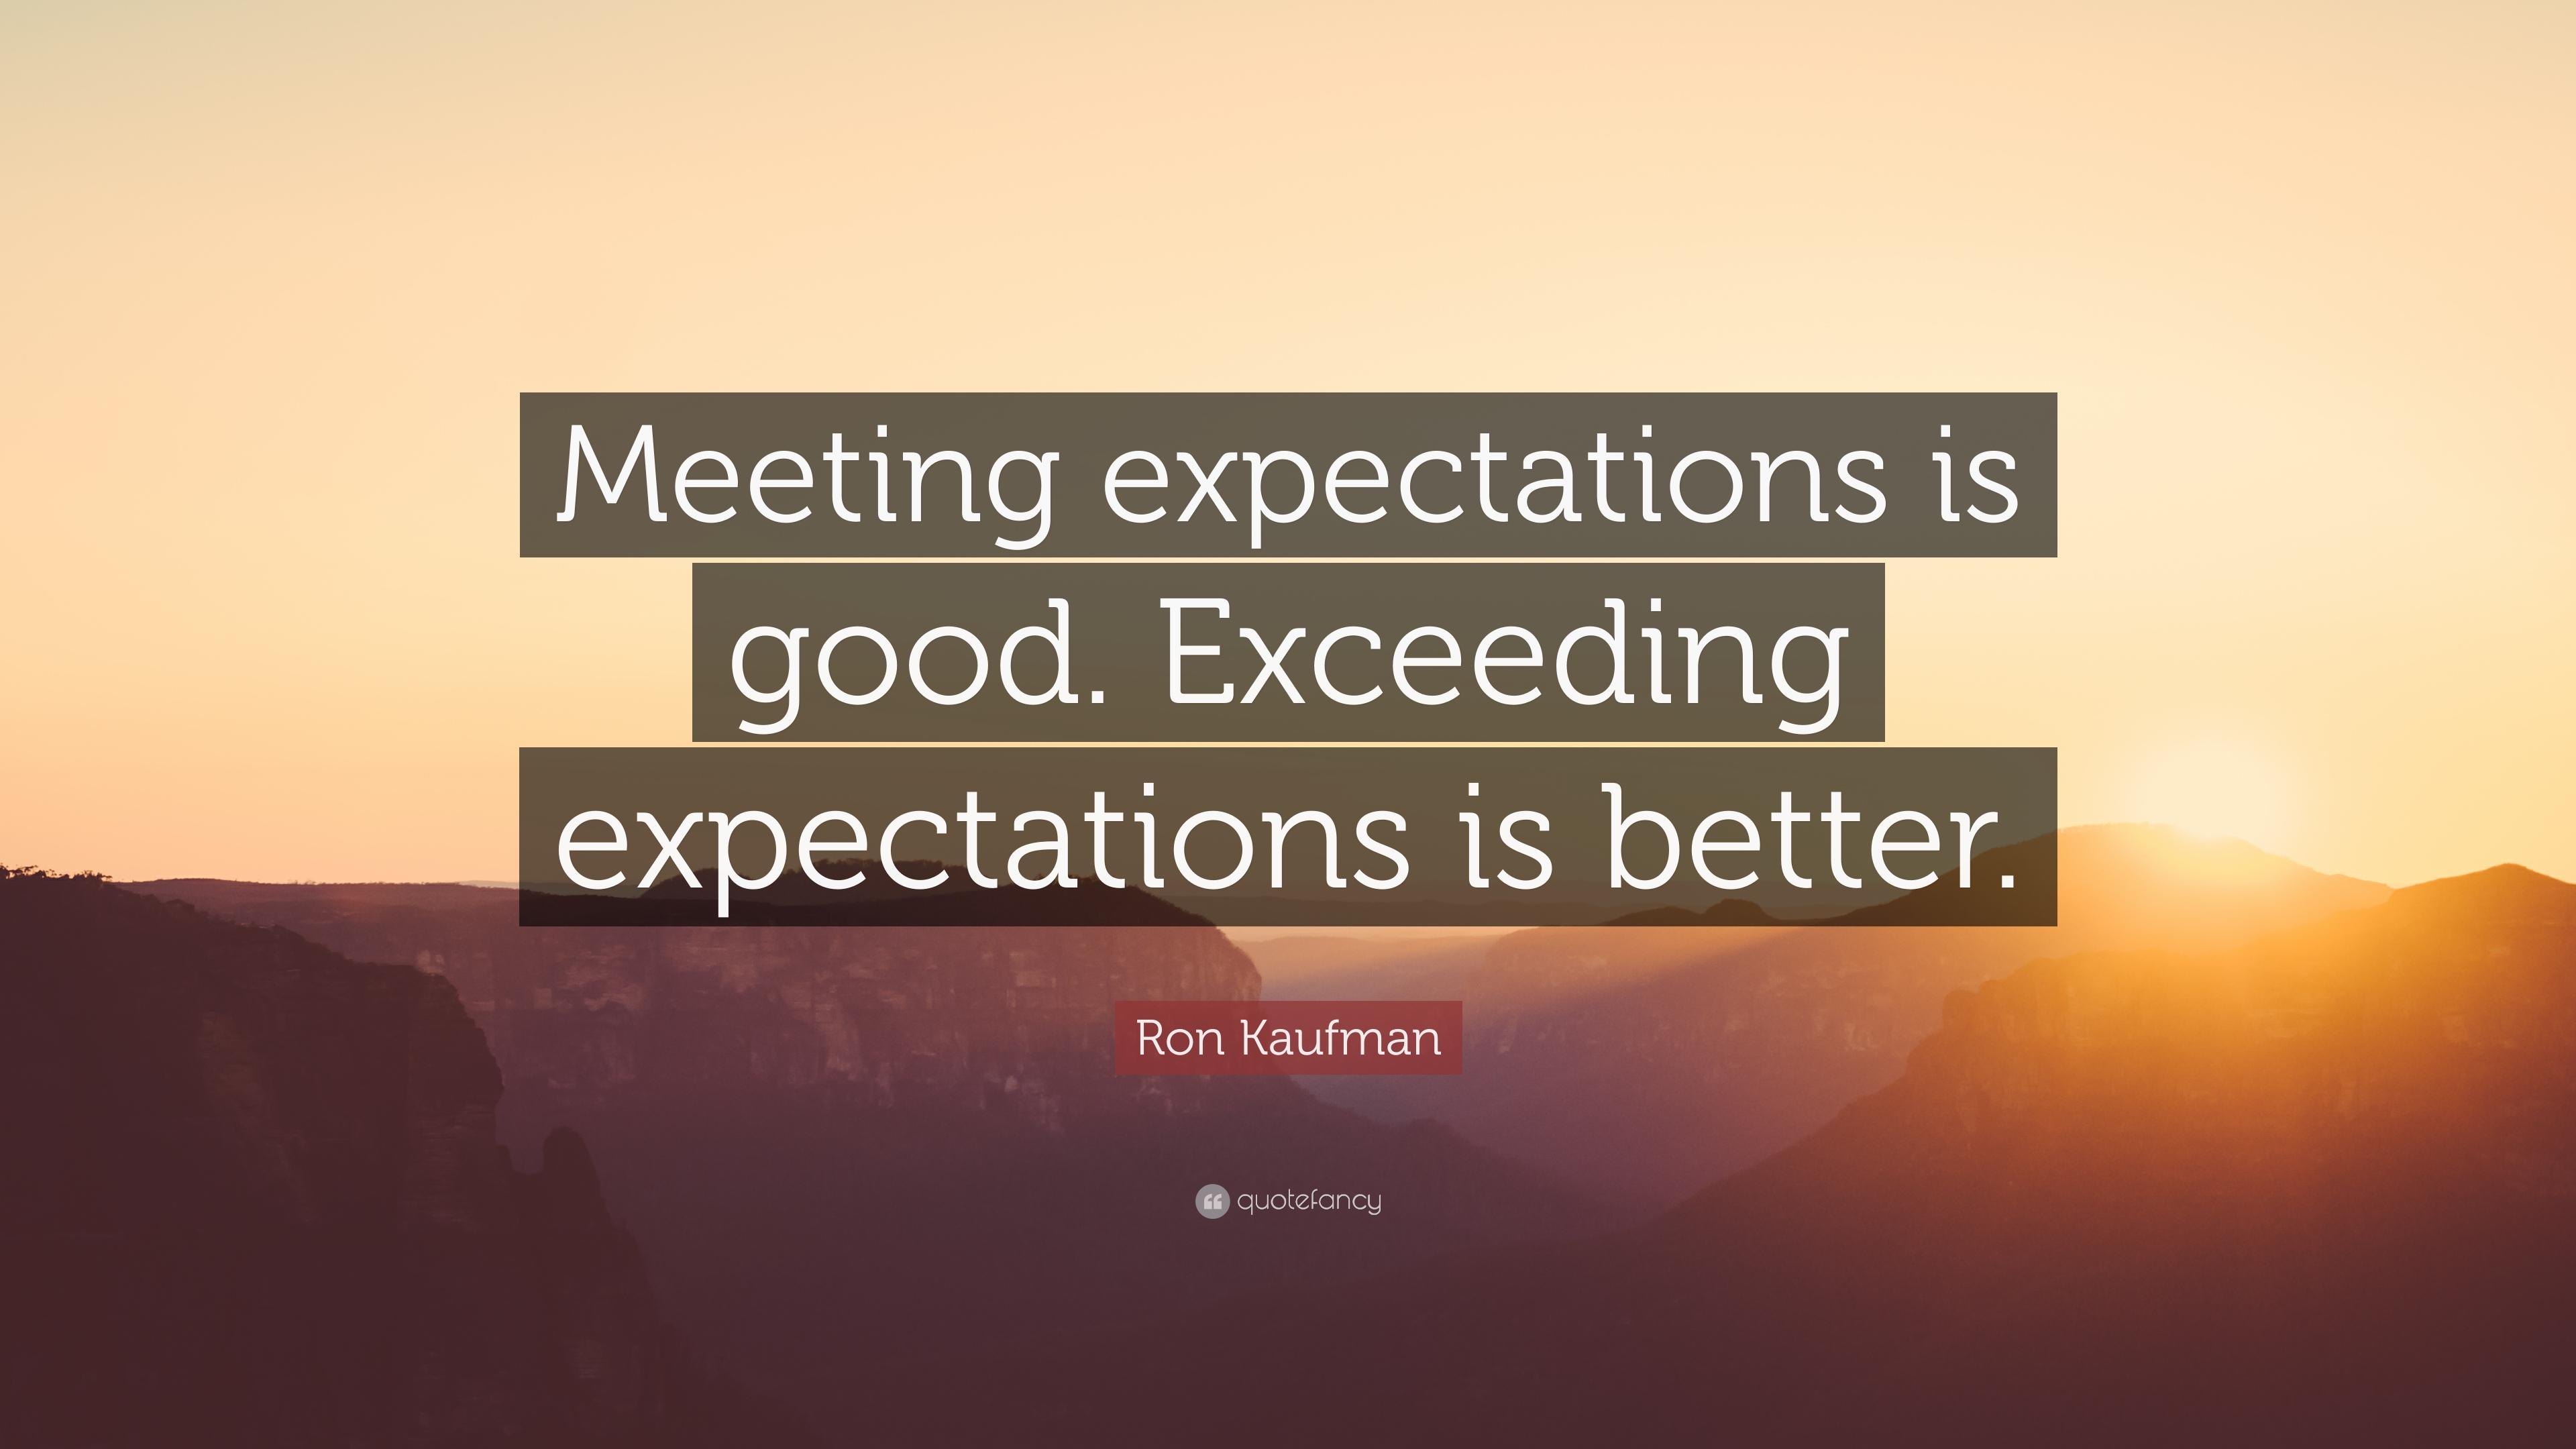 Ron Kaufman Quote: “Meeting expectations is good. Exceeding